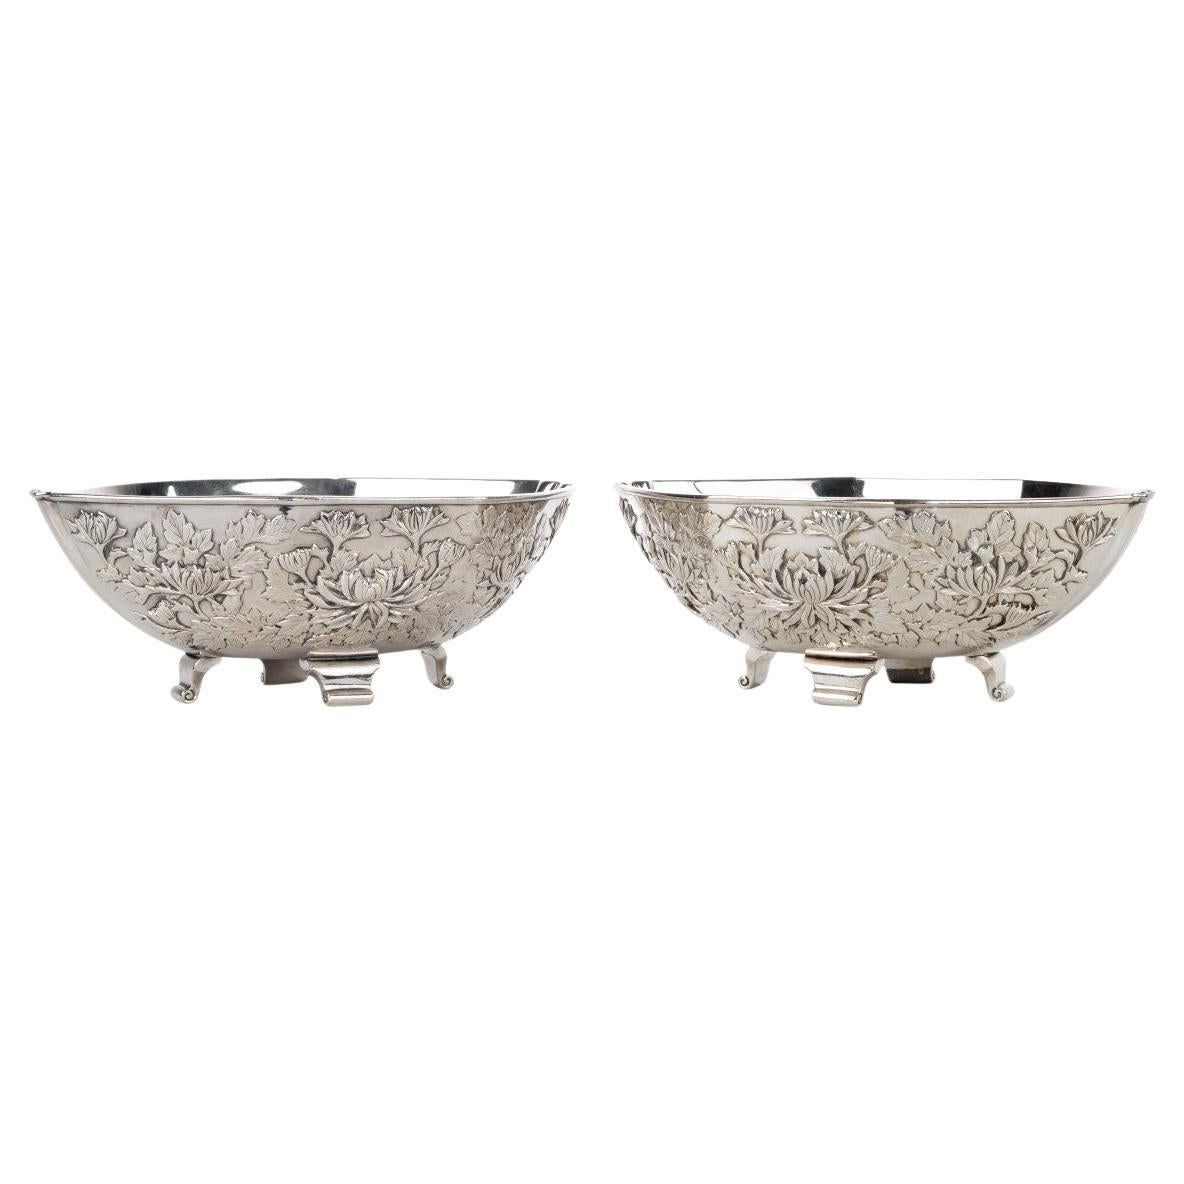 Pair of Meiji Period Solid Silver Bowls by Eigyoku For Sale